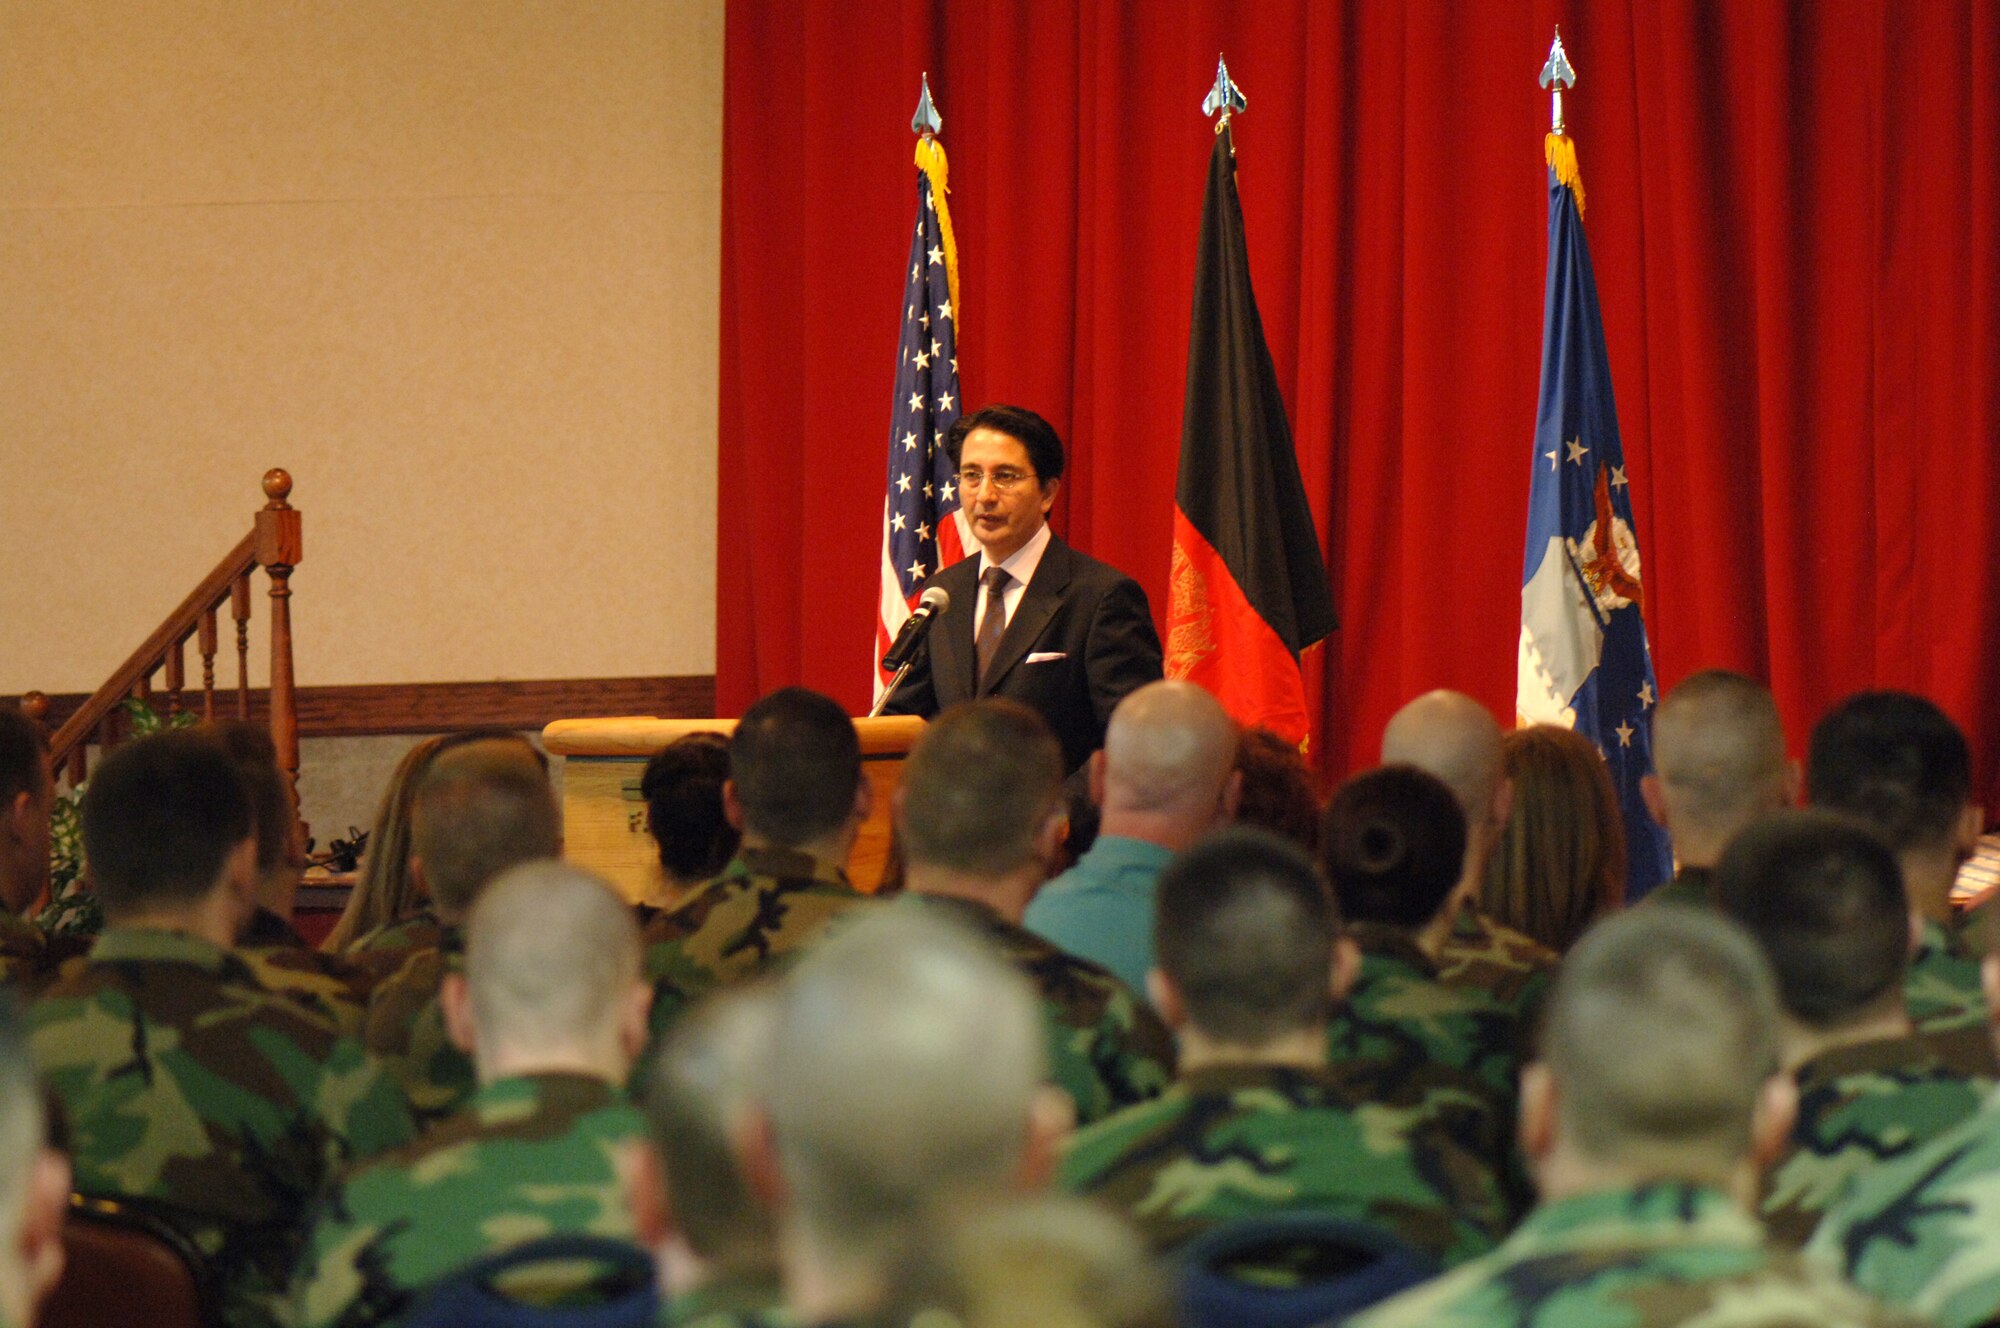 FAIRCHILD AIR FORCE BASE, Wash. -- Afghanistan’s ambassador to the United States, Said Jawad, spoke to Fairchild Airmen gathered at Club Fairchild March 1, thanking them for their service to his country. (U.S. Air Force Photo/Airman First Class Daniel Chapman)